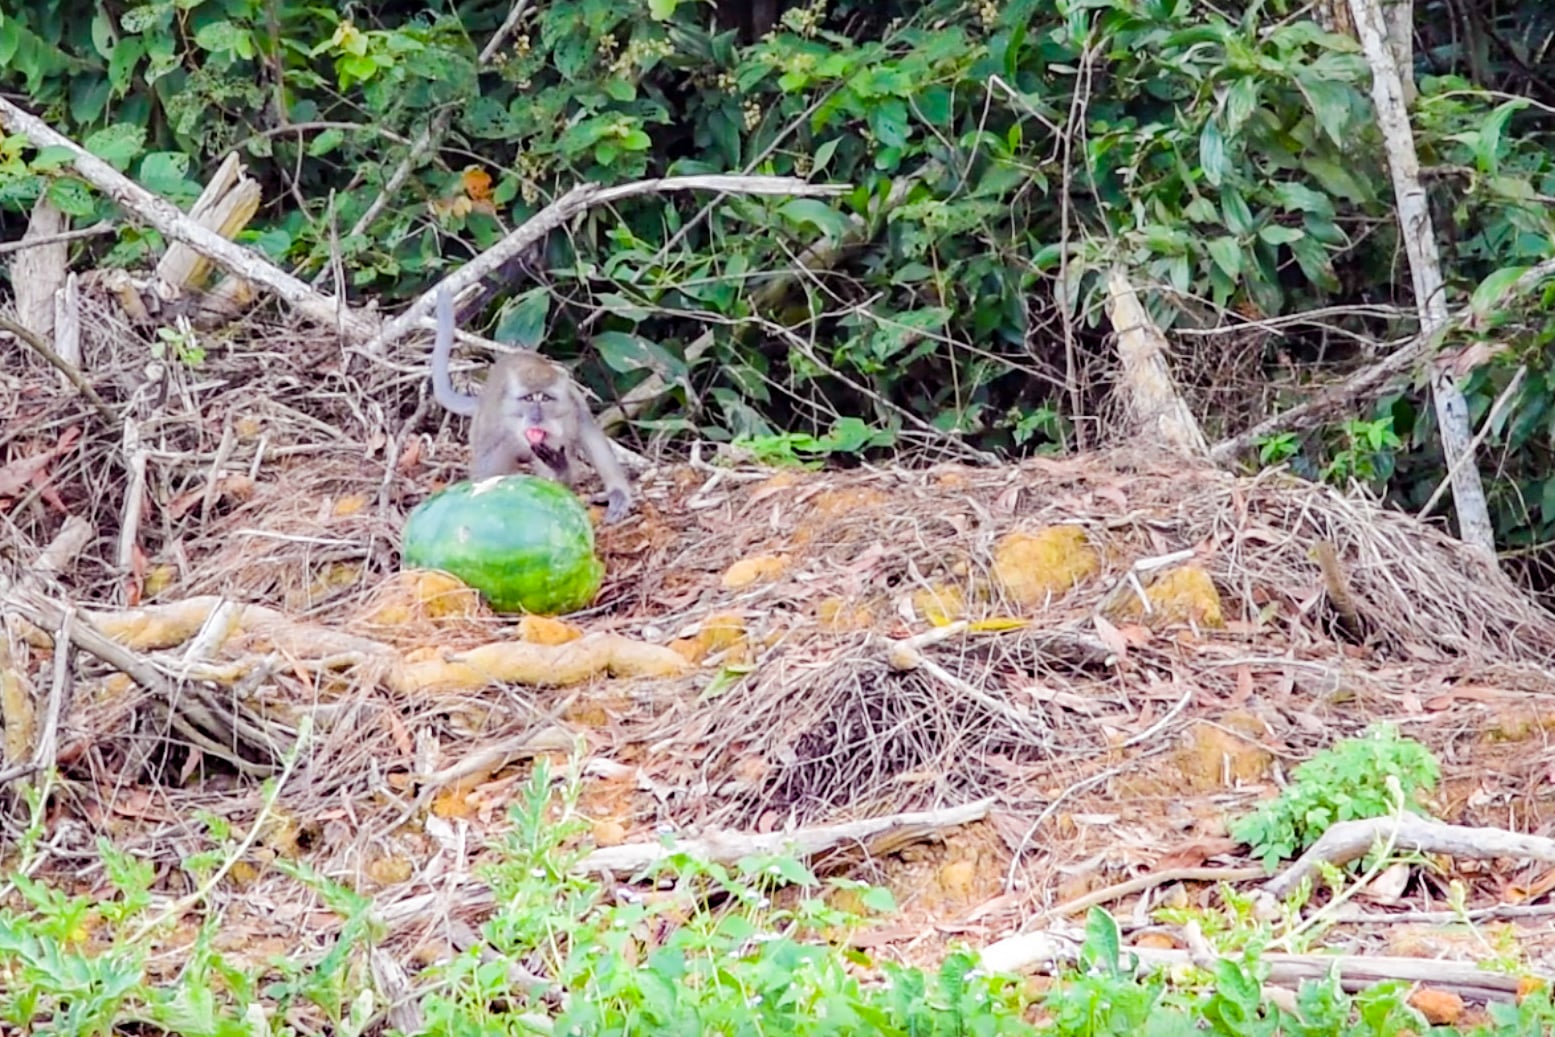 melon farming in malaysia - monkey eating melons